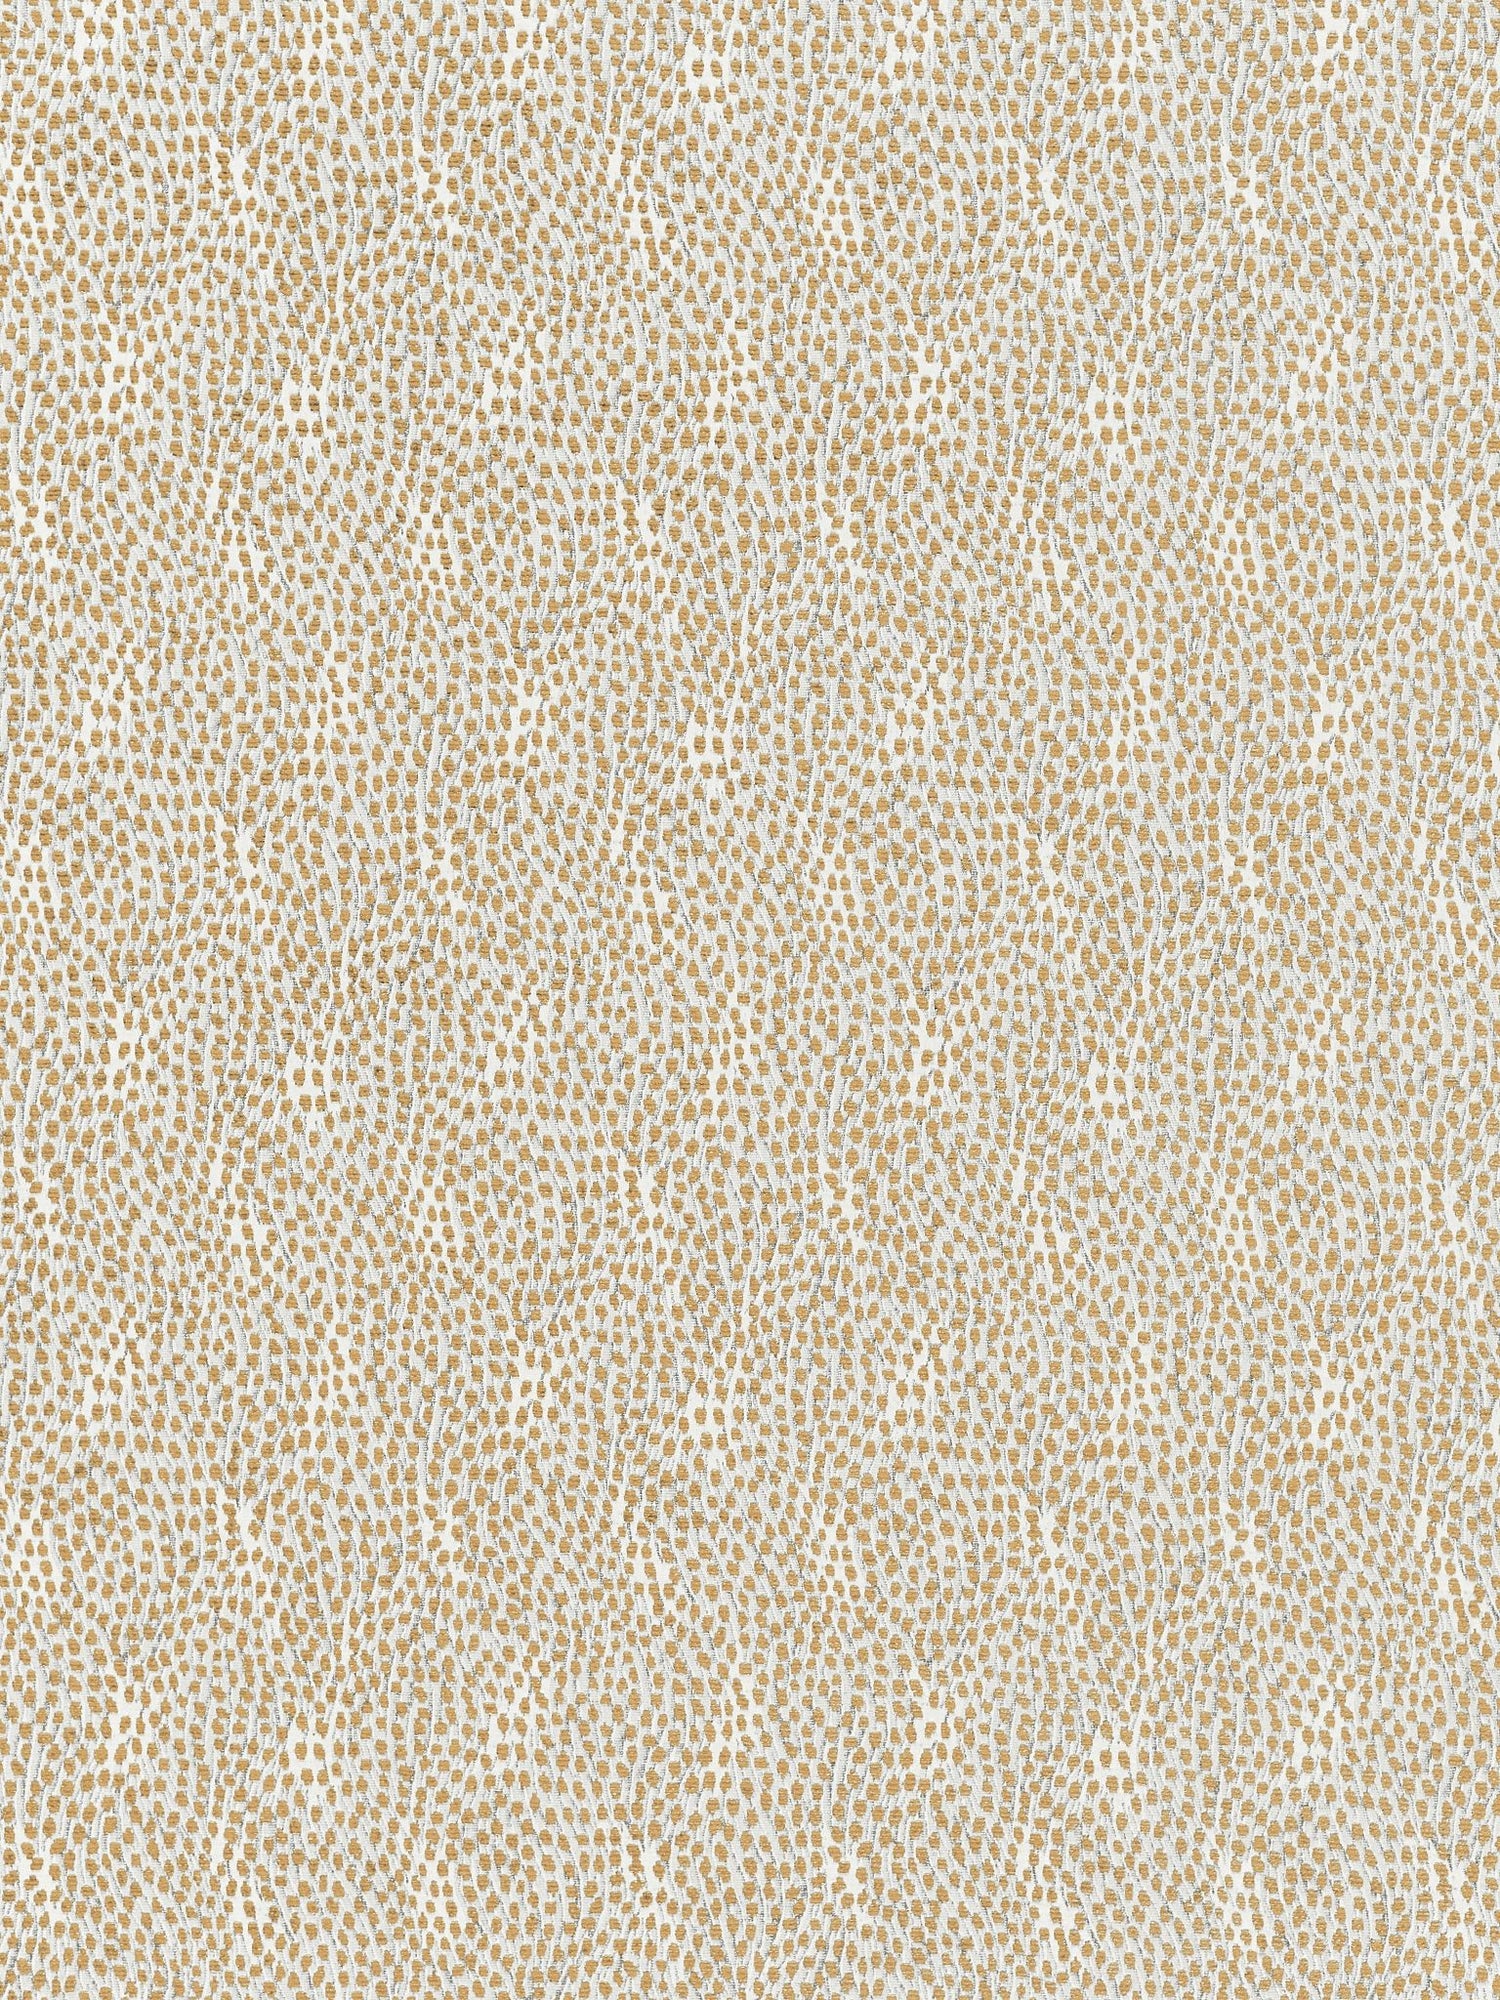 Flurry fabric in caribou color - pattern number BI 00011234 - by Scalamandre in the Old World Weavers collection